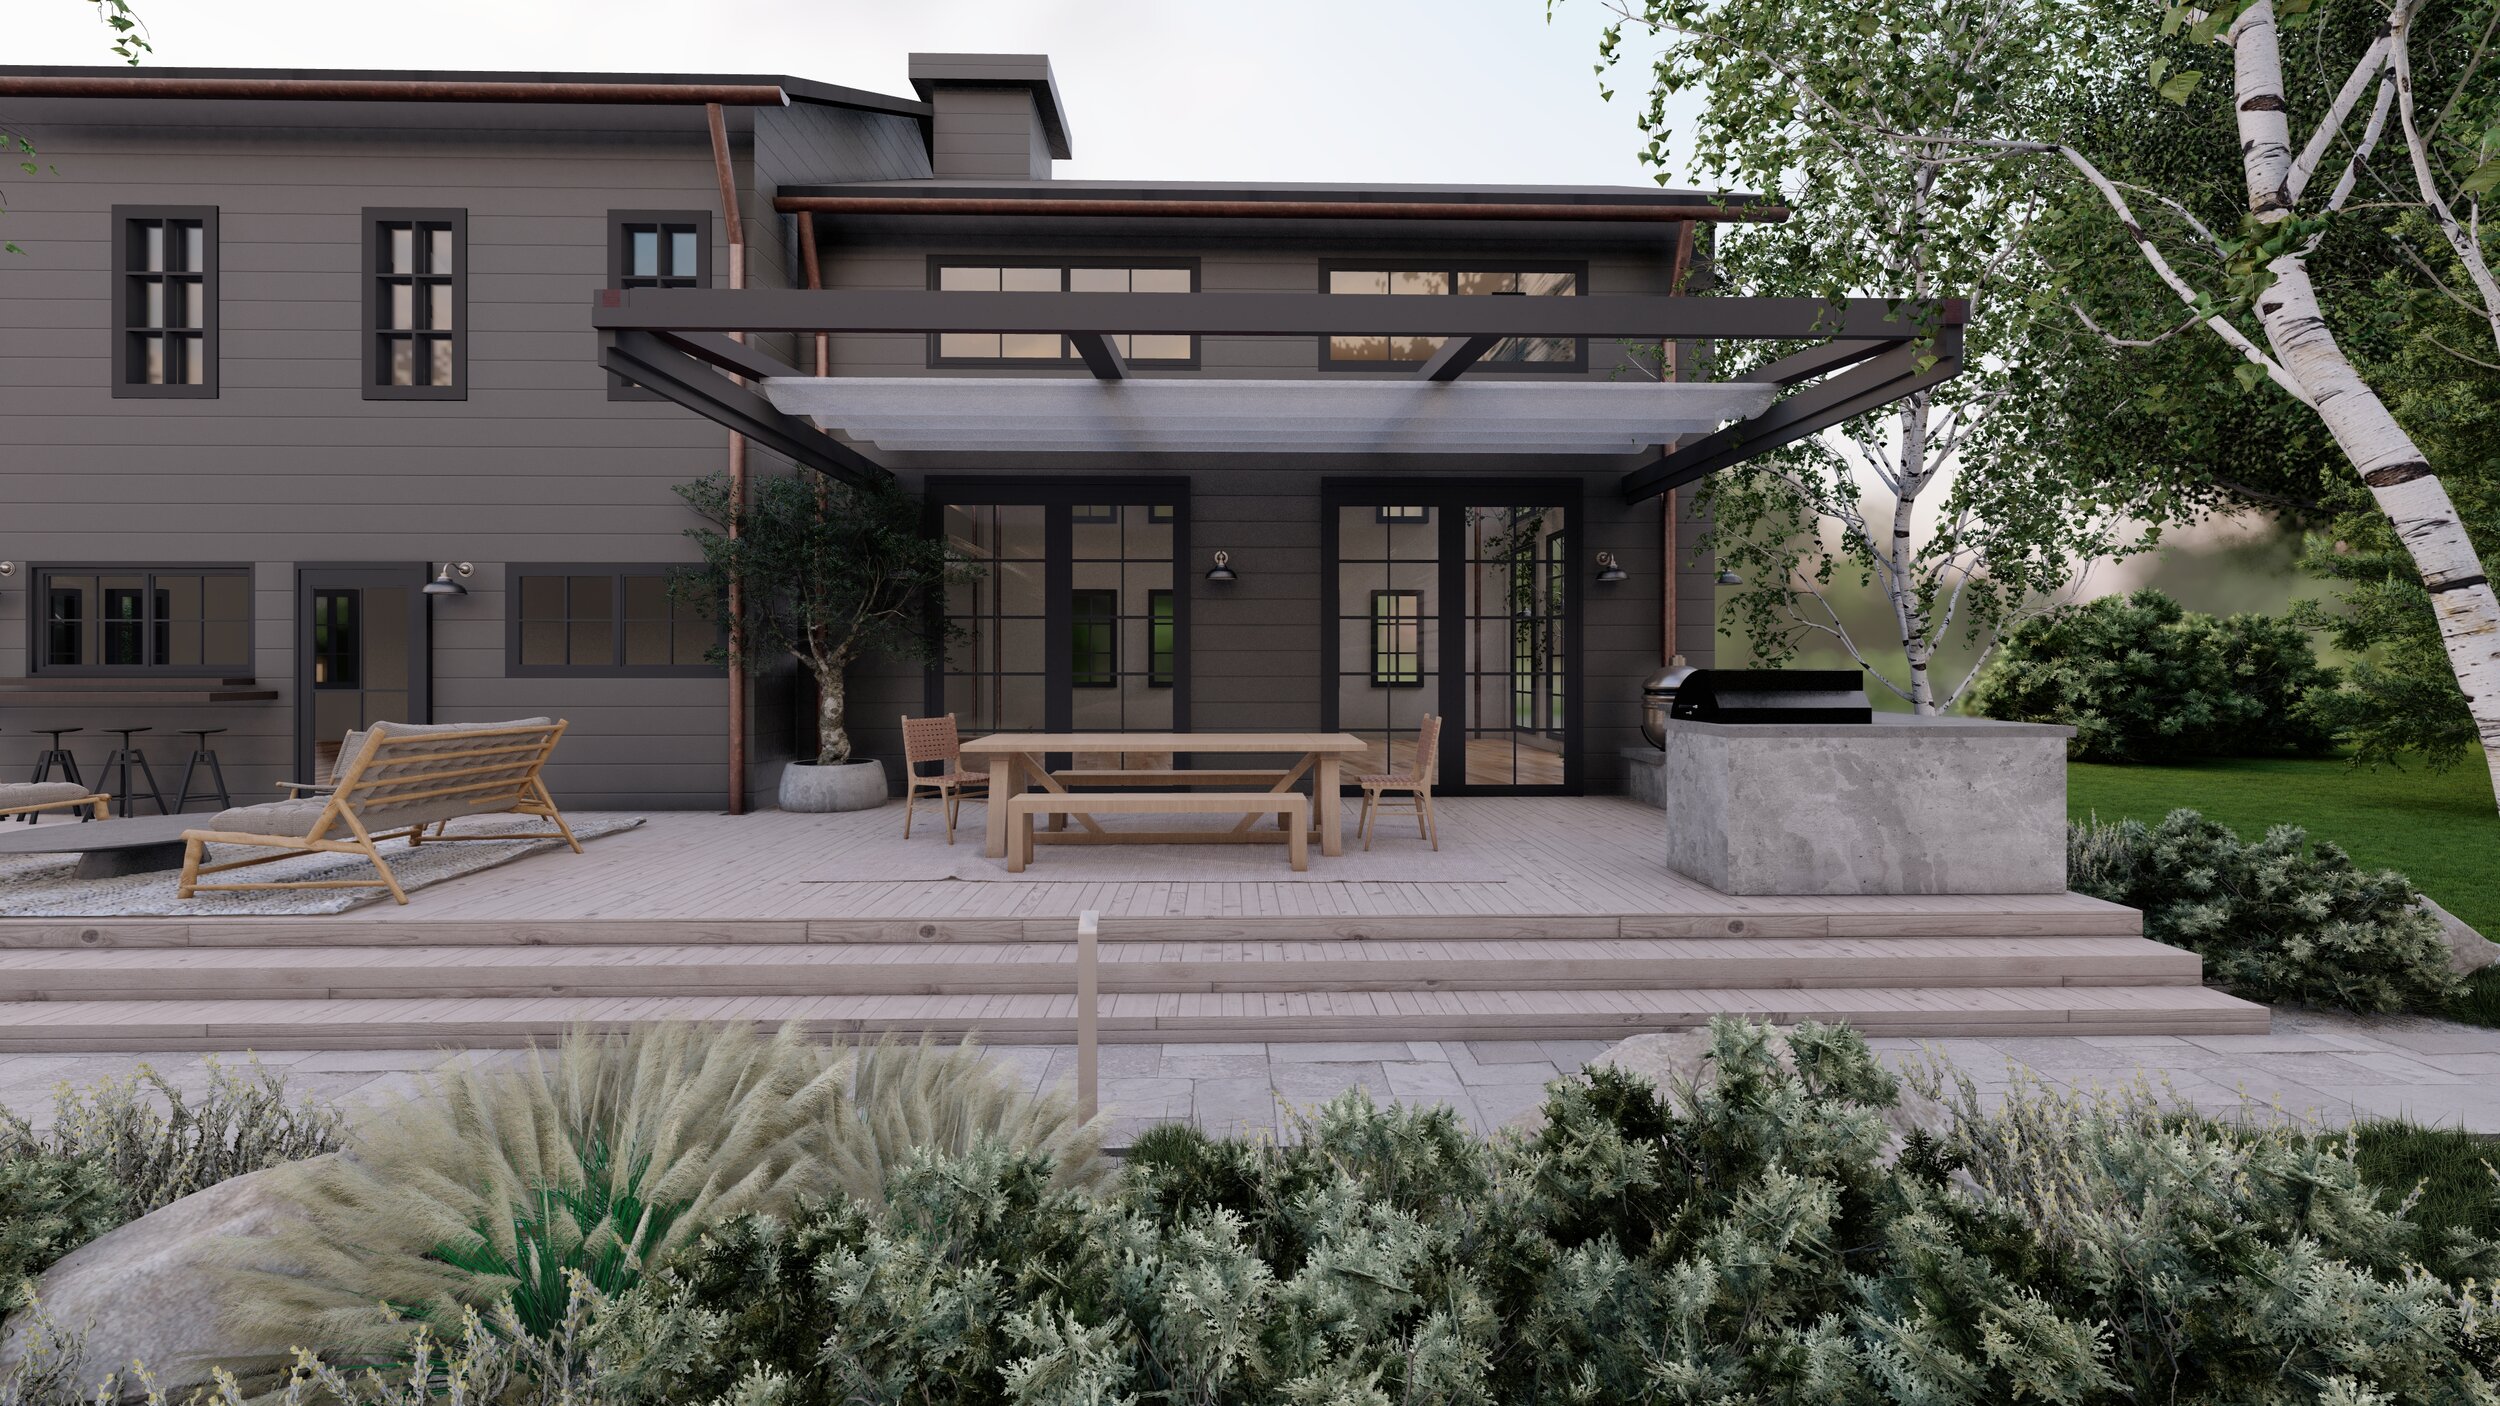 Dark charcoal home exterior with grasses, birch trees near outdoor dining area and outdoor kitchen under pergola